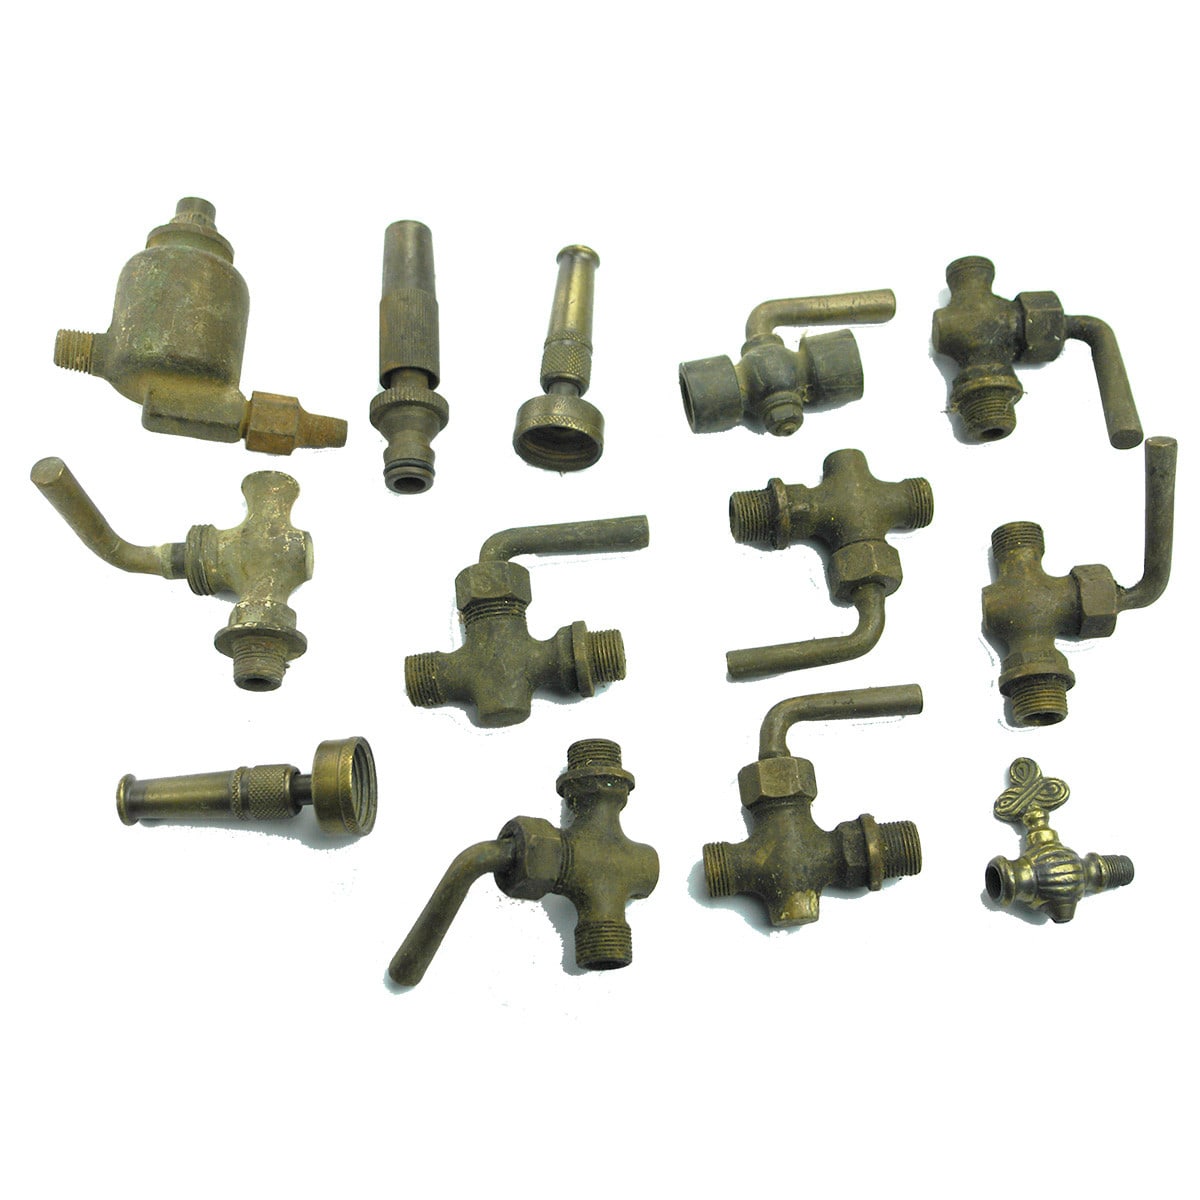 13 Brass and Cast Iron taps, connectors, hose ends.